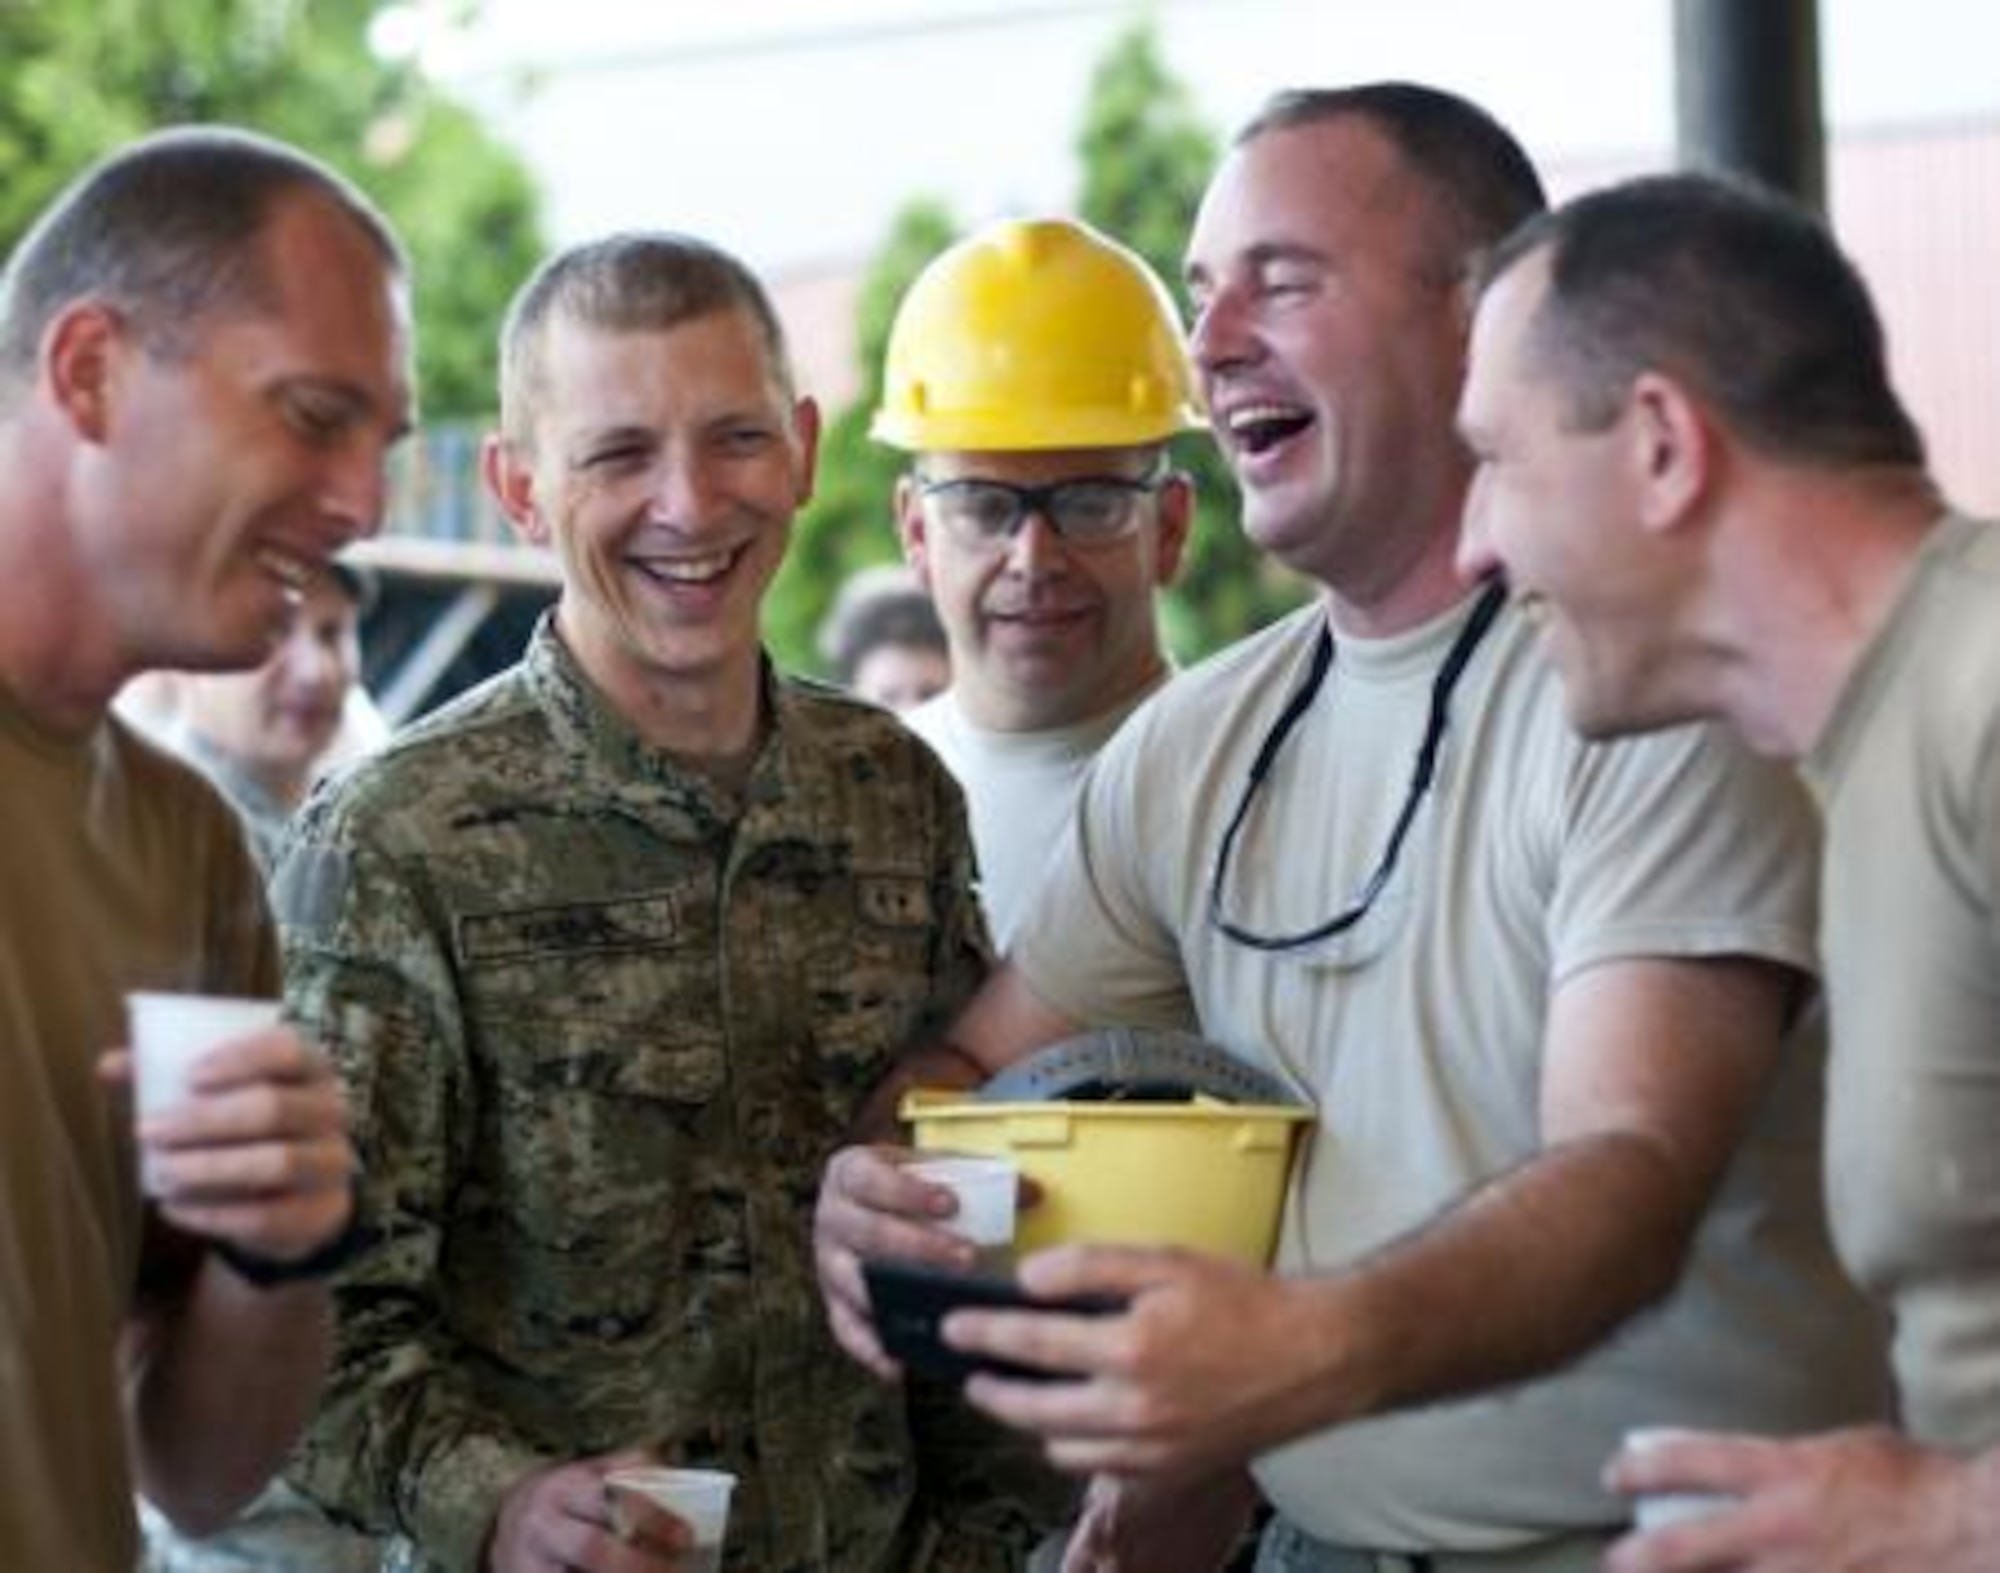 Senior Master Sgt. Kurt Huver, 133rd Civil Engineering Squadron, shares videos on his cellphone with members of the Croatian Army outside an elementary school in Ogulin, Croatia, June 18, 2014. The school bathrooms are being renovated by Airmen from the 133rd Civil Engineering Squadron, 148th Civil Engineering Squadron, and 219th Red Horse Squadron in partnership with the Croatian Army. (U.S. Air National Guard photo by Staff Sgt. Austen Adriaens)